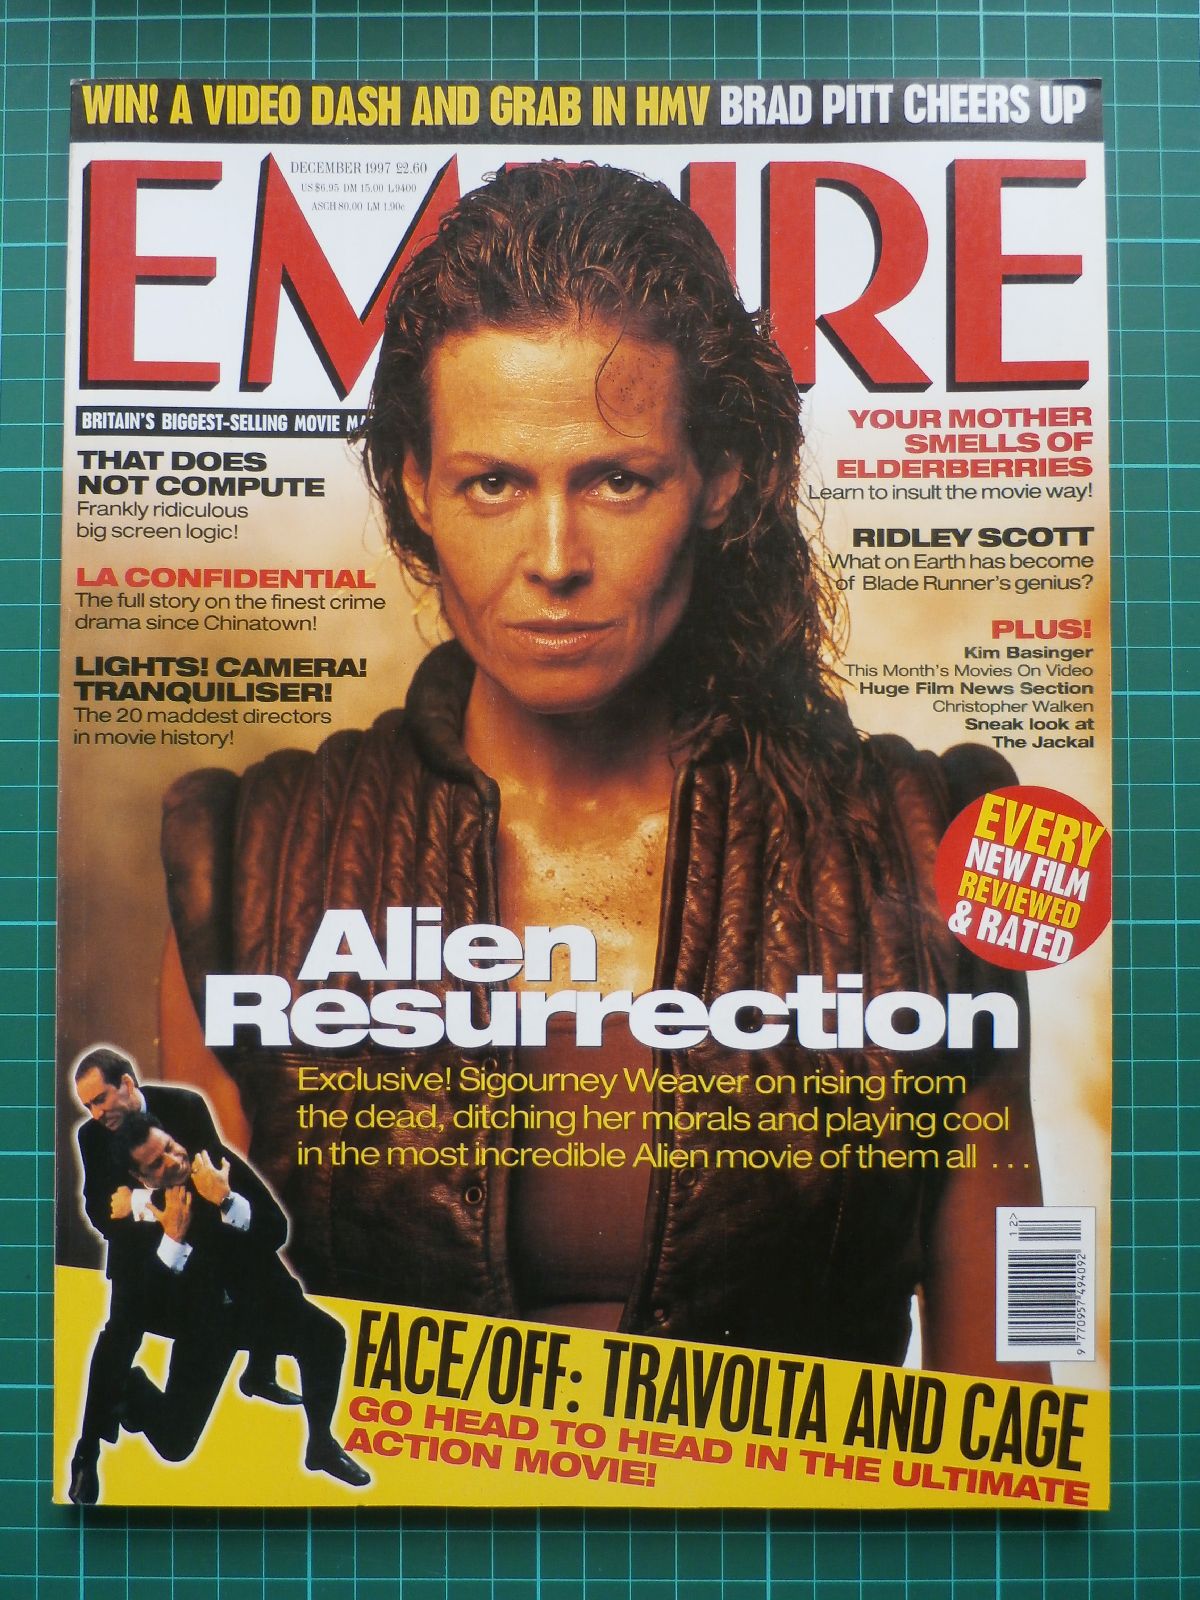 Empire Film Magazine Issue 101 to 200 - please choose from dropdown